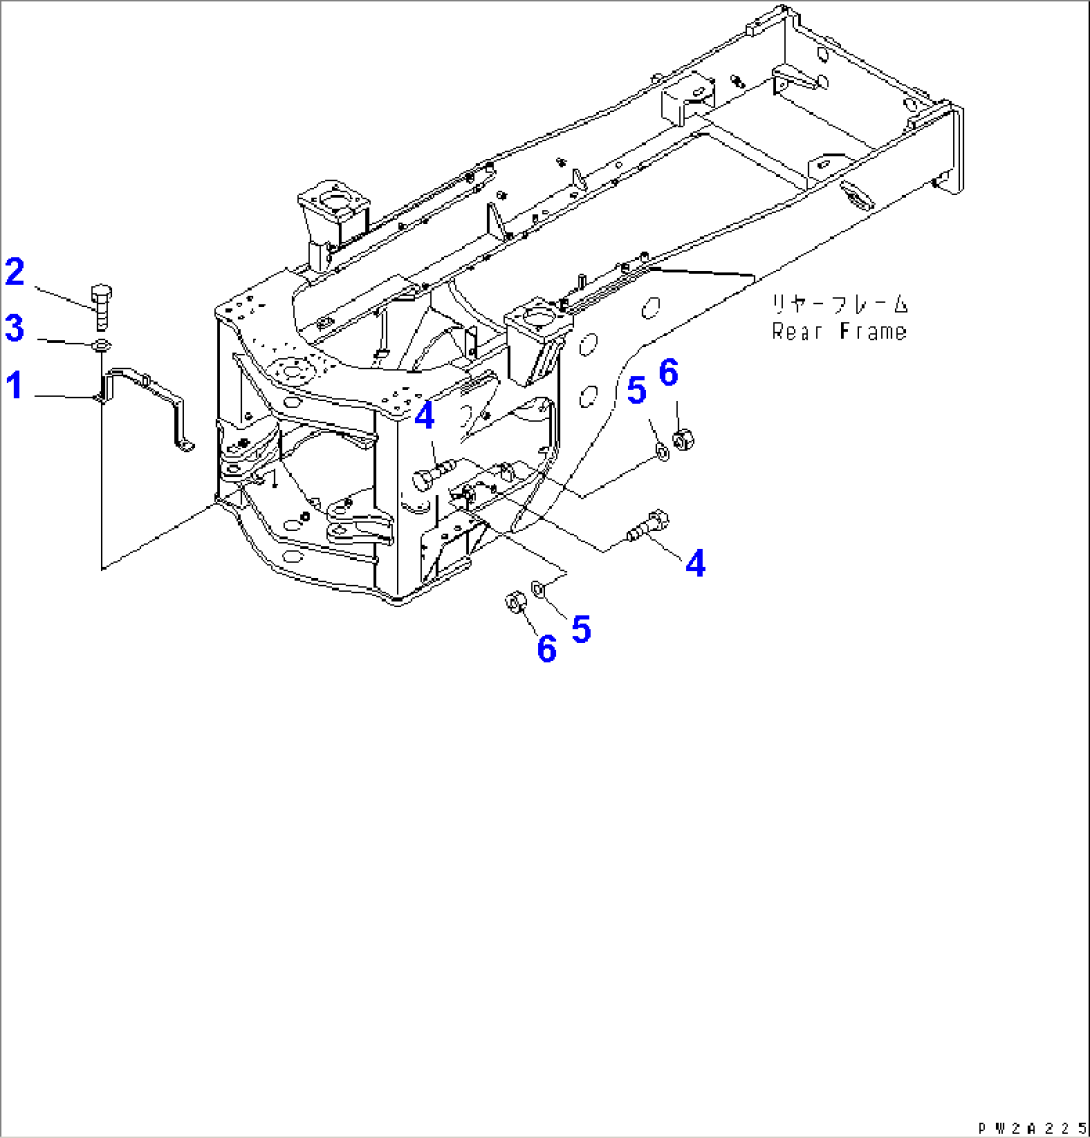 REAR FRAME (SHAFT GUARD AND TRANSMISSION MOUNTING)